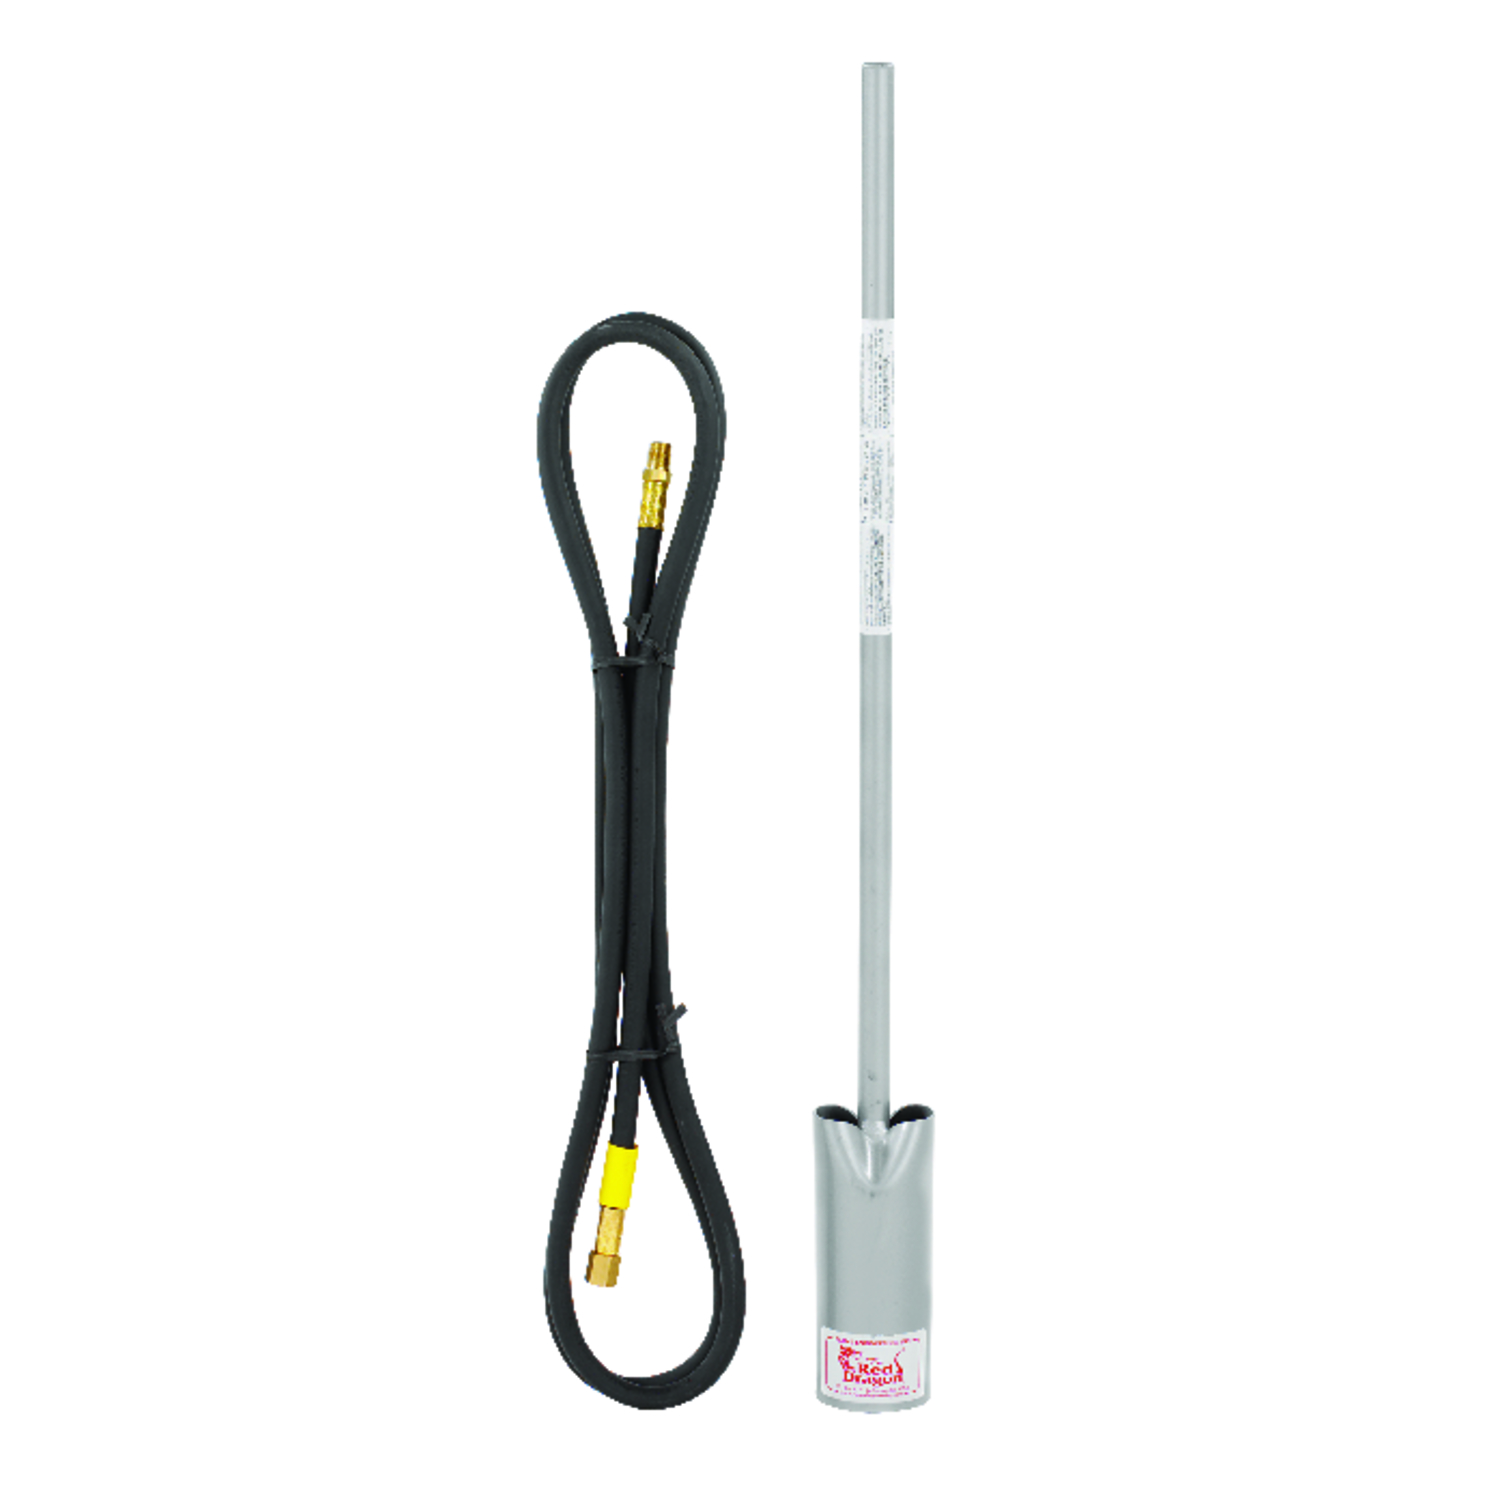 Made in the USA, Best selling economy 500K BTU torch kit delivers the heat for weed burning, thawing, burning stumps, sterilizing cages, clearing irrigation ditches, patching asphalt, and heating pipe. Great for large rural property owners and industrial use for a larger coverage area and quick results.